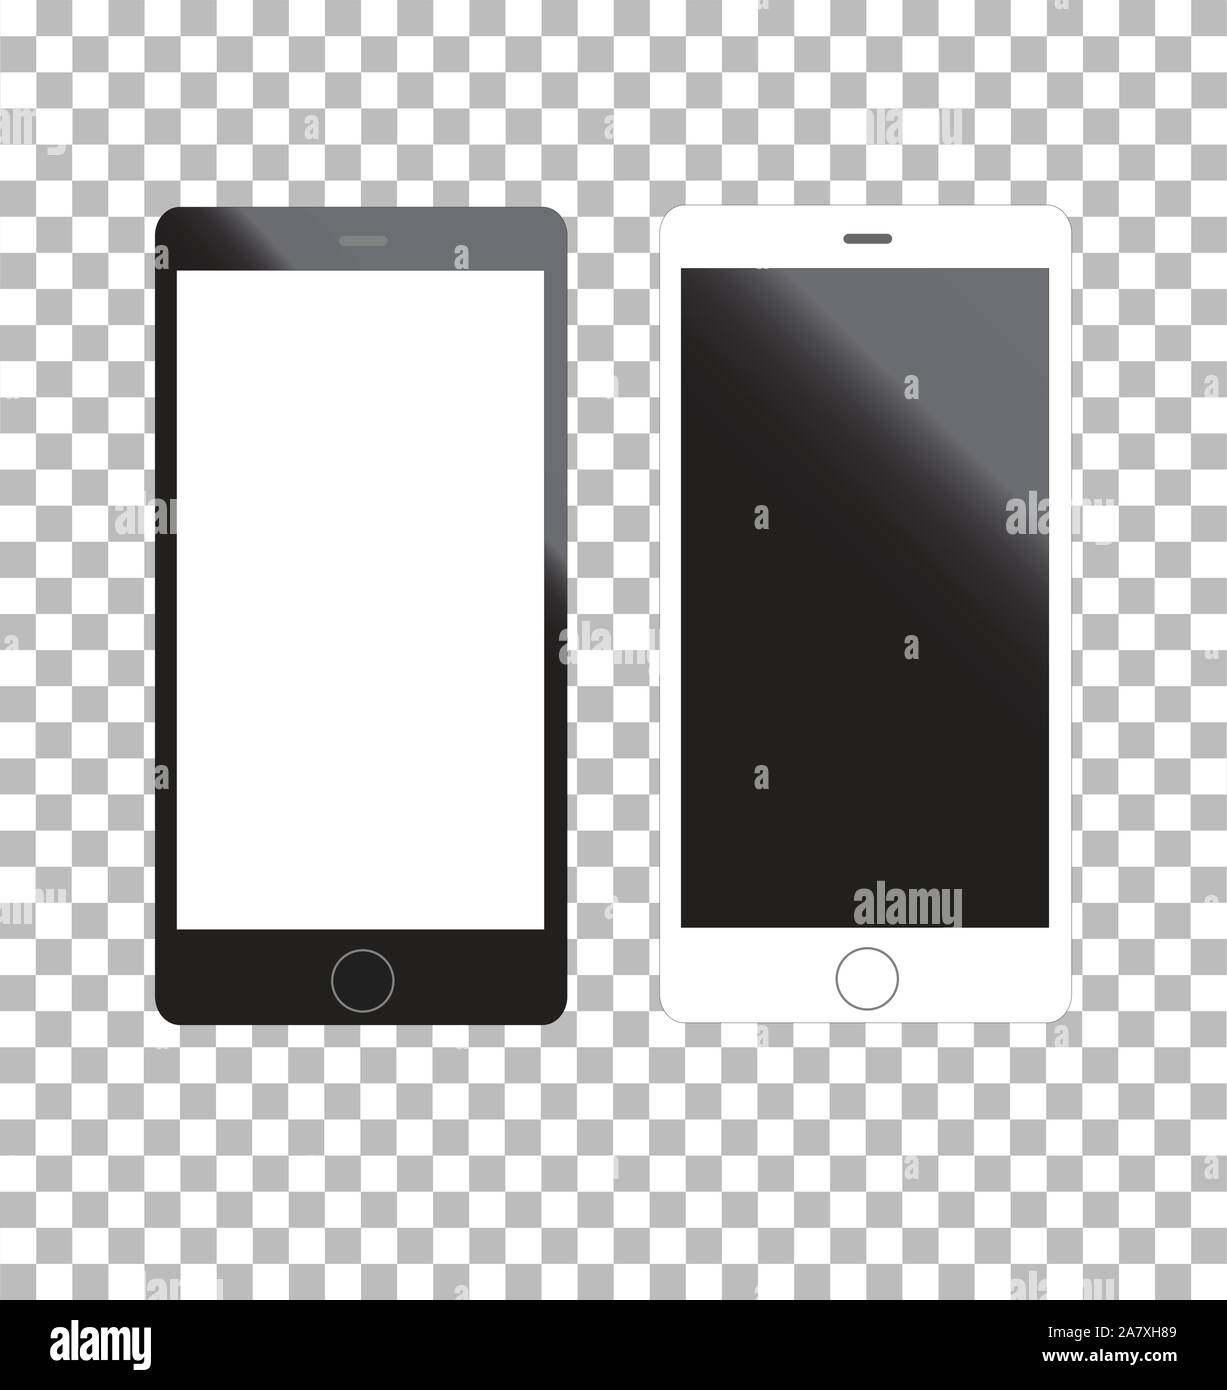 mockup phone black color front view on transparent background. flat style. mockup phone black color icon for your web site design, logo, app, UI. mock Stock Vector